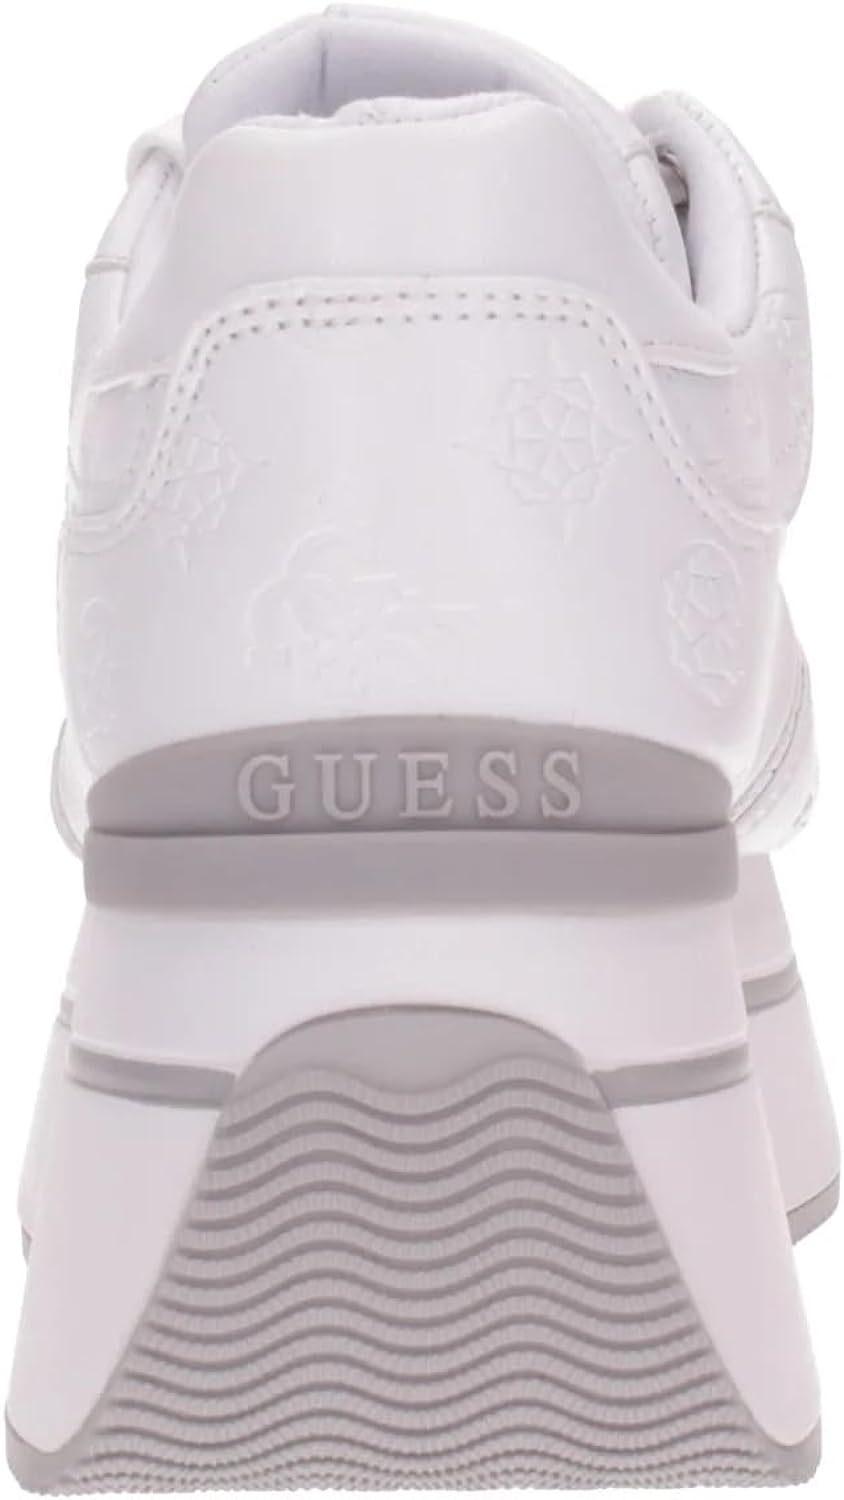 Sneakers Guess Donna Bianco/grigio